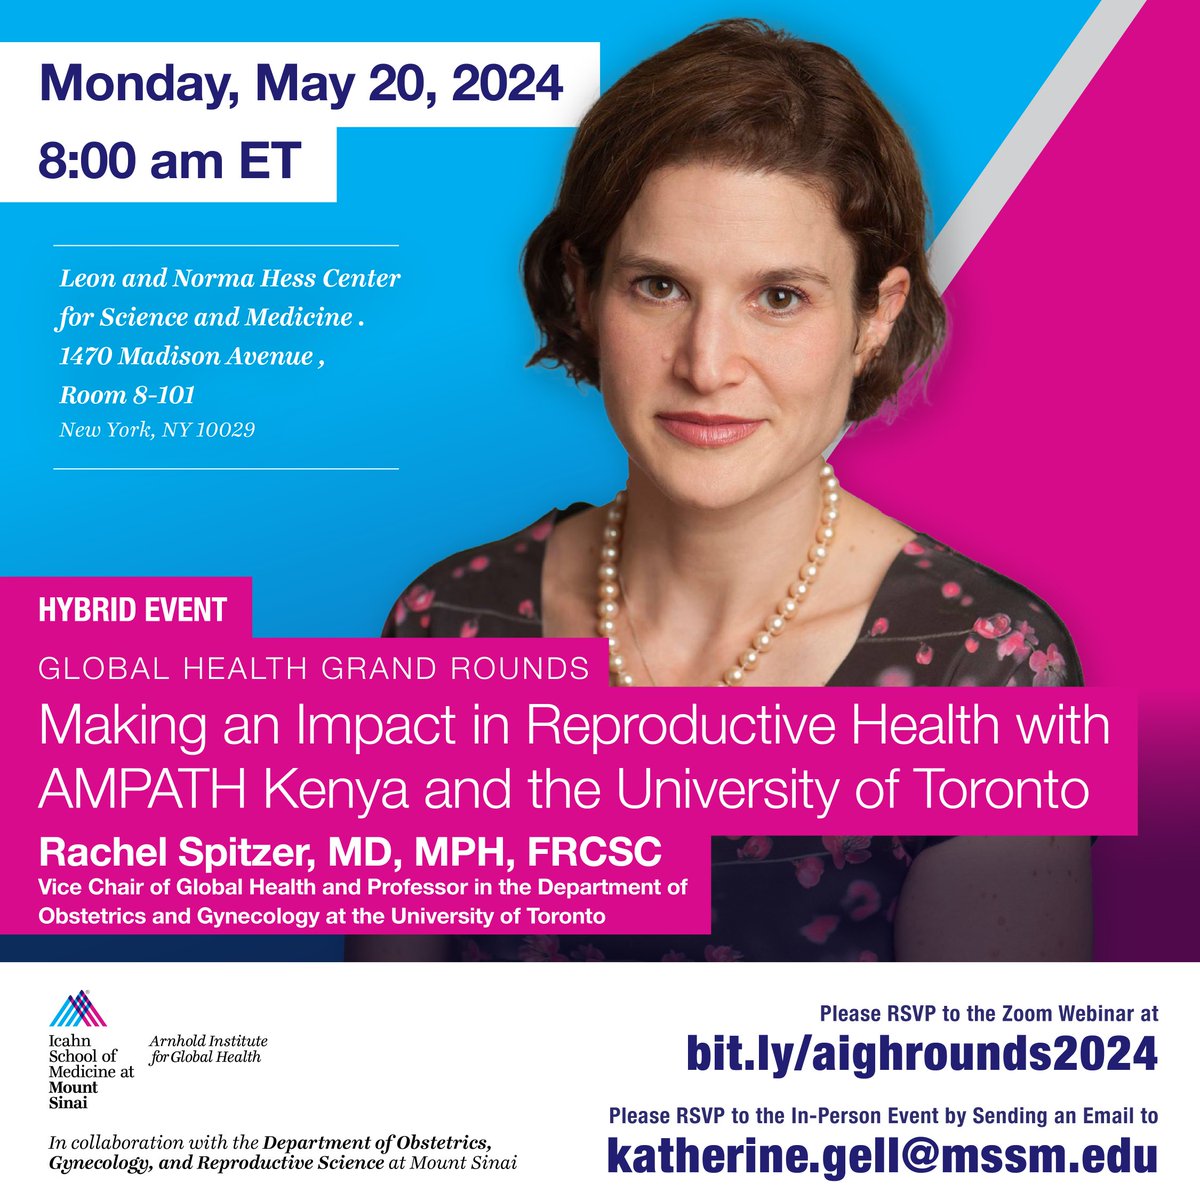 Check our next Global Health Grand Rounds on May 20th at 8 am to learn more about Dr. Rachel Spitzer and her work with AMPATH Kenya! Register at the link in our flyer!! #globalhealth #webinar #healthequity #reproductivehealth